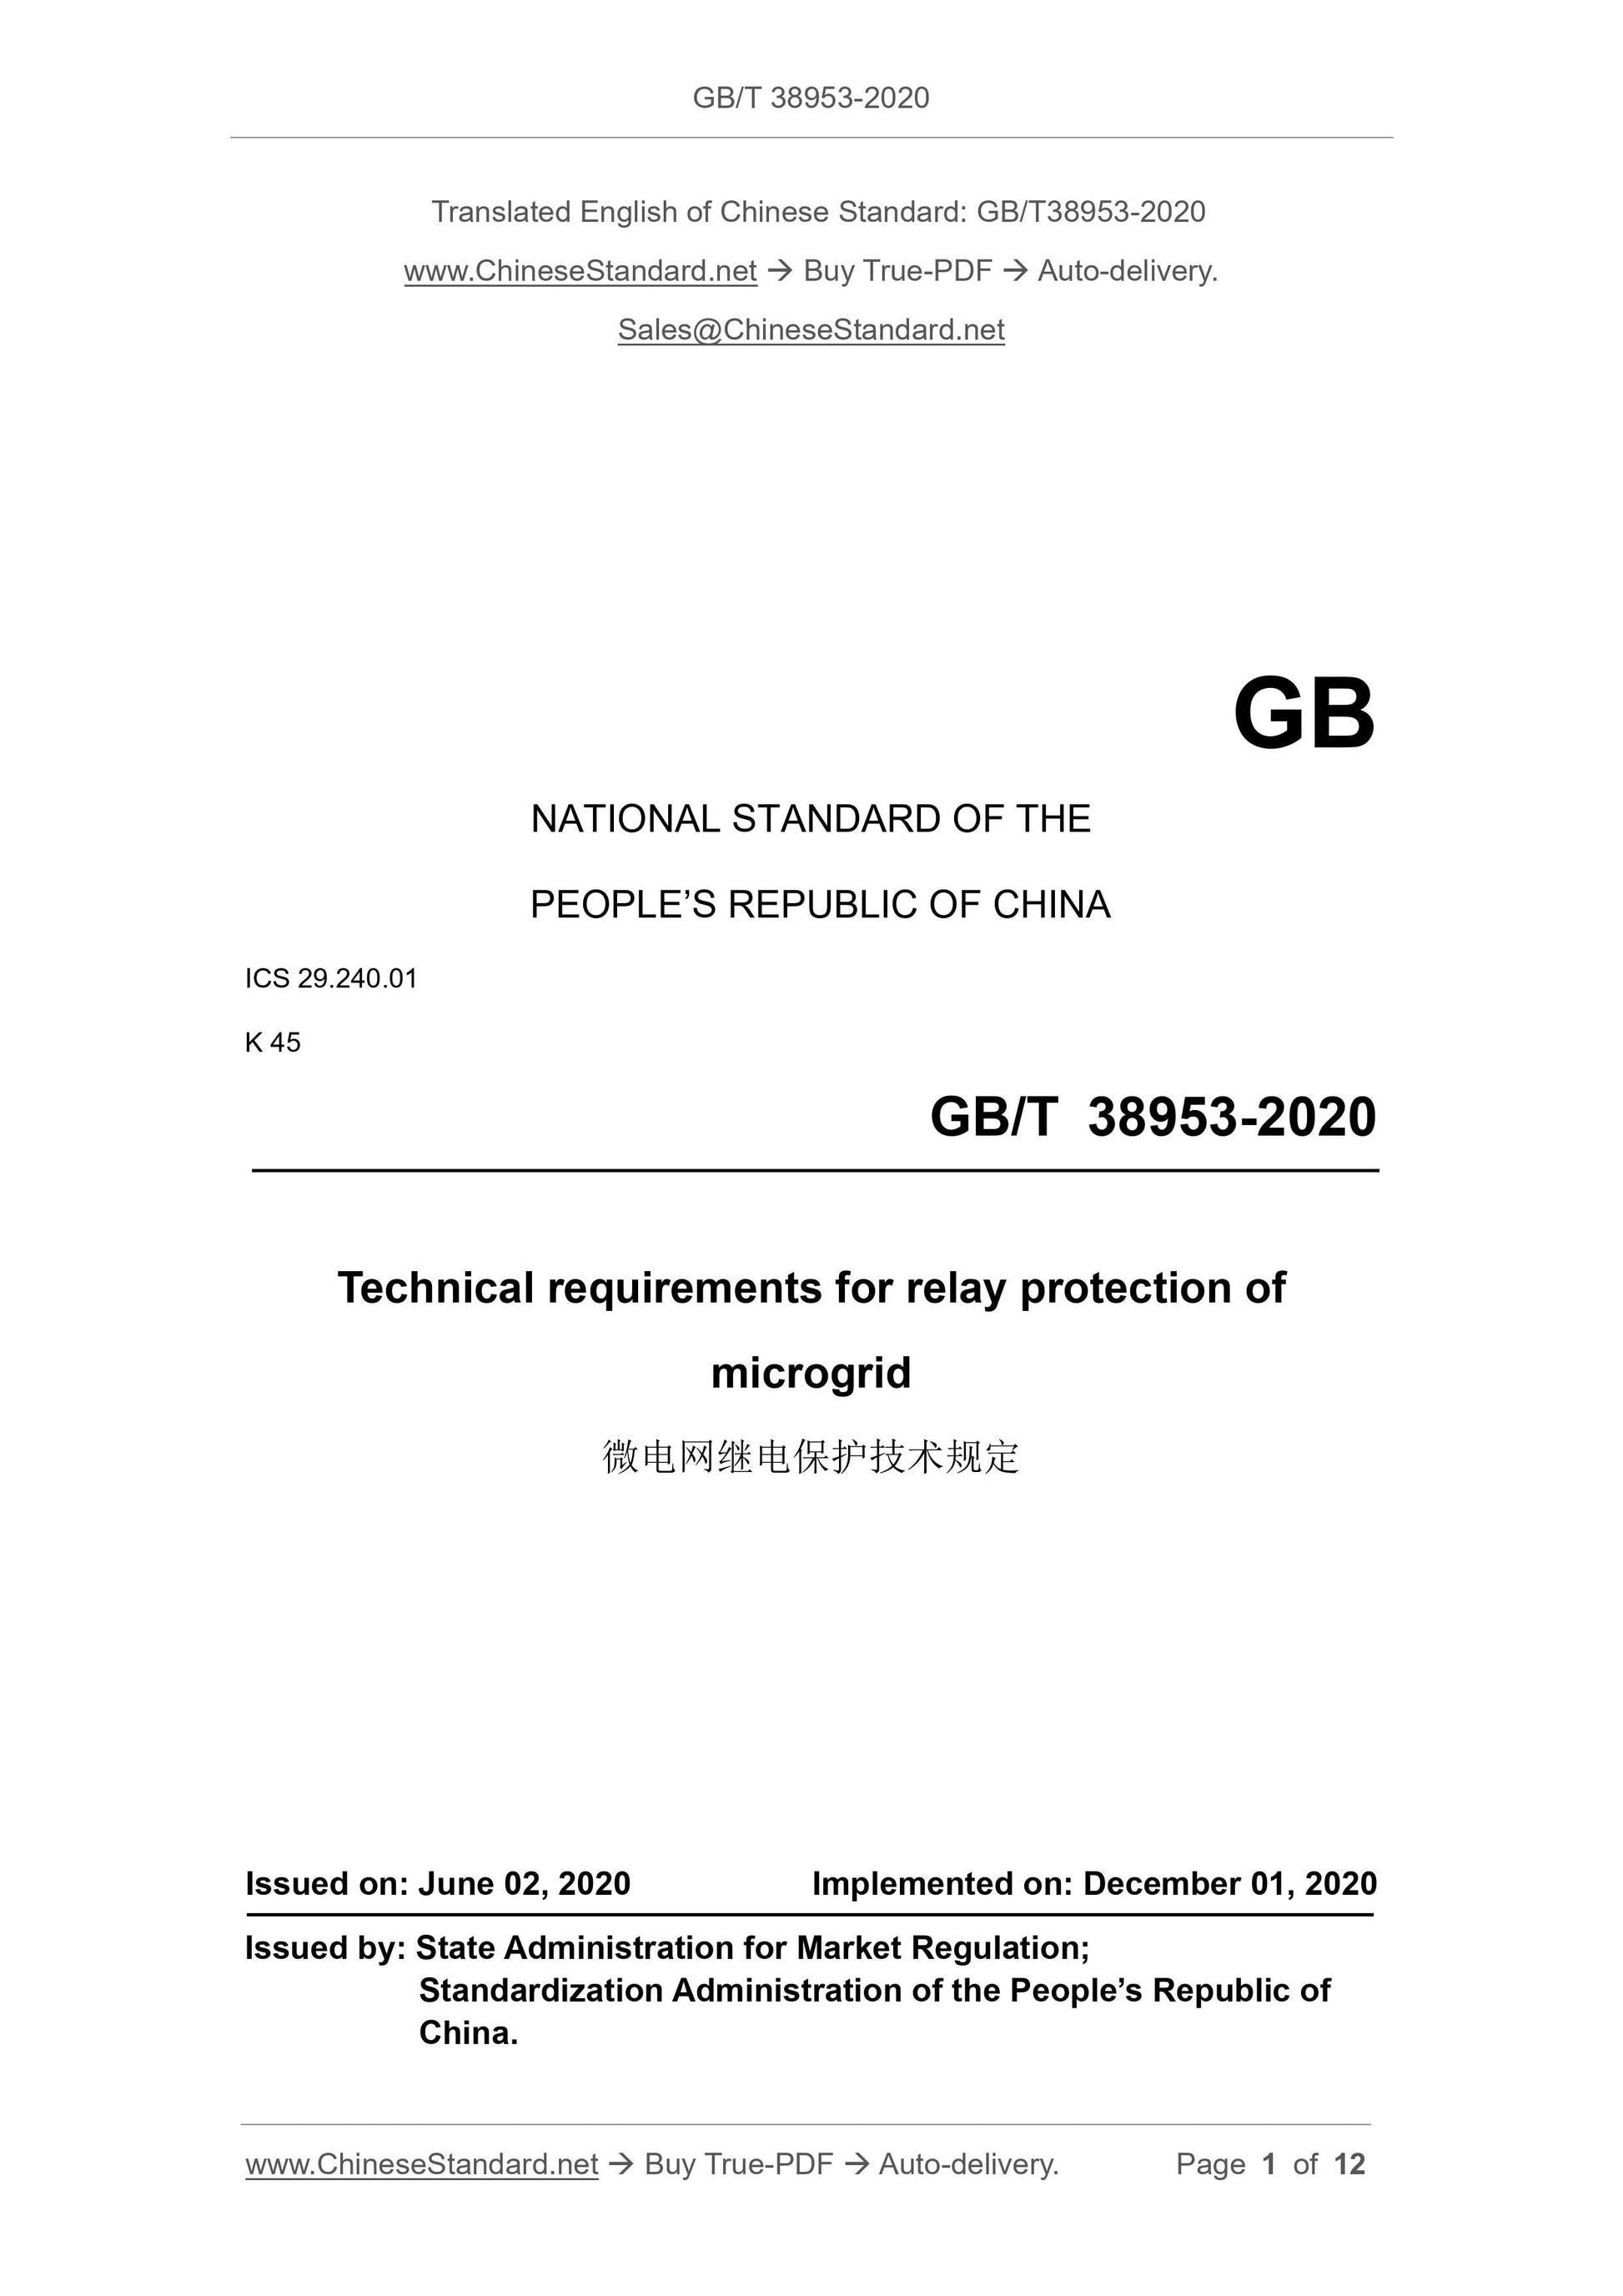 GB/T 38953-2020 Page 1